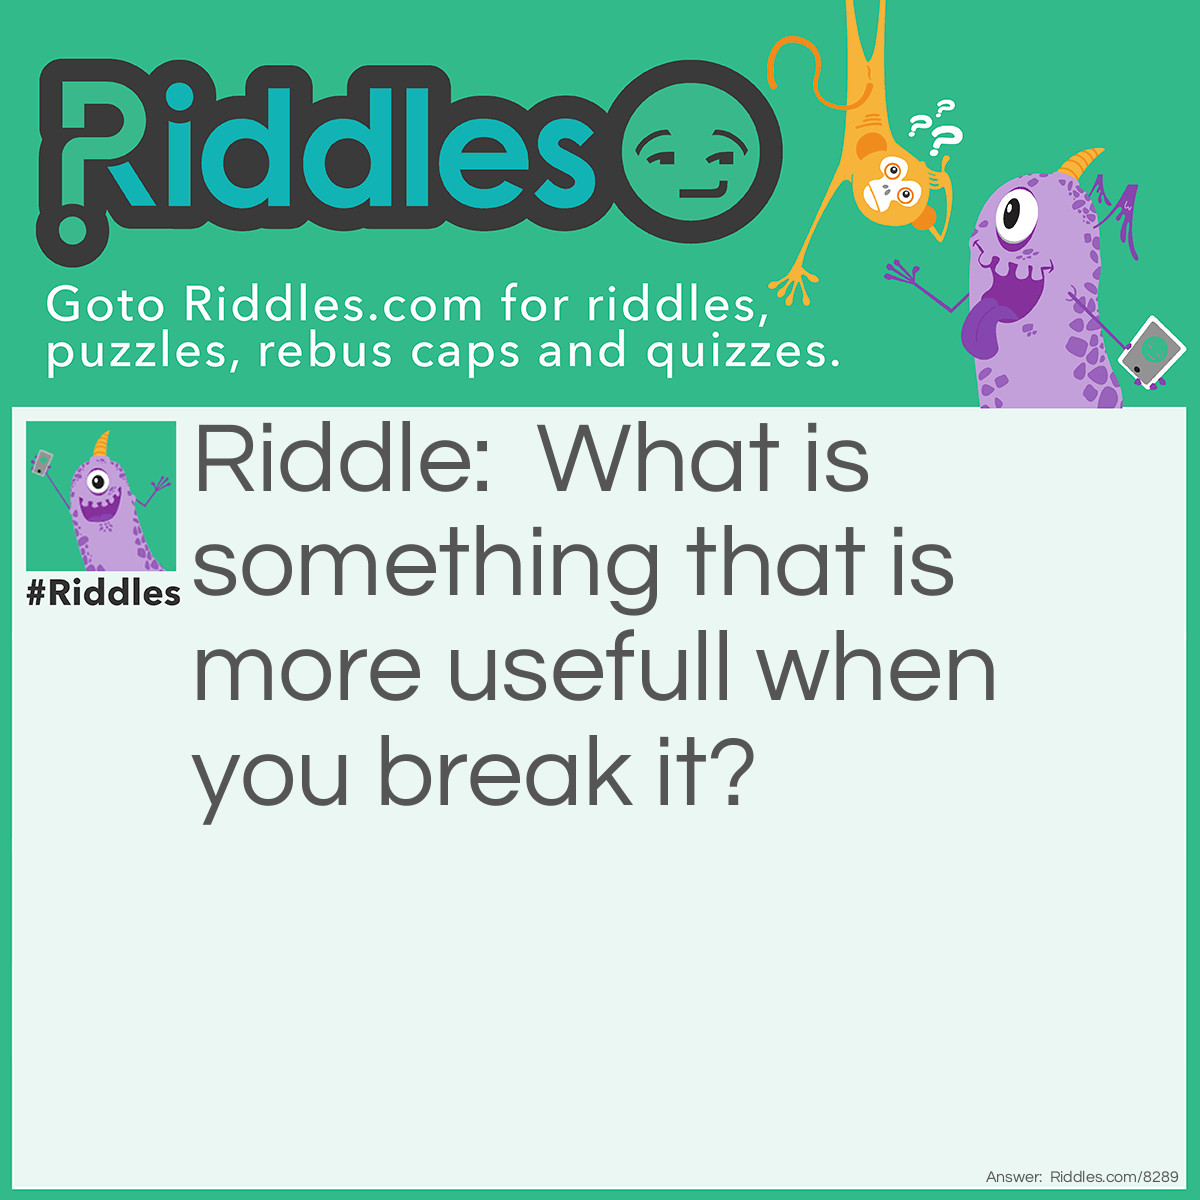 Riddle: What is something that is more usefull when you break it? Answer: Chopsticks.